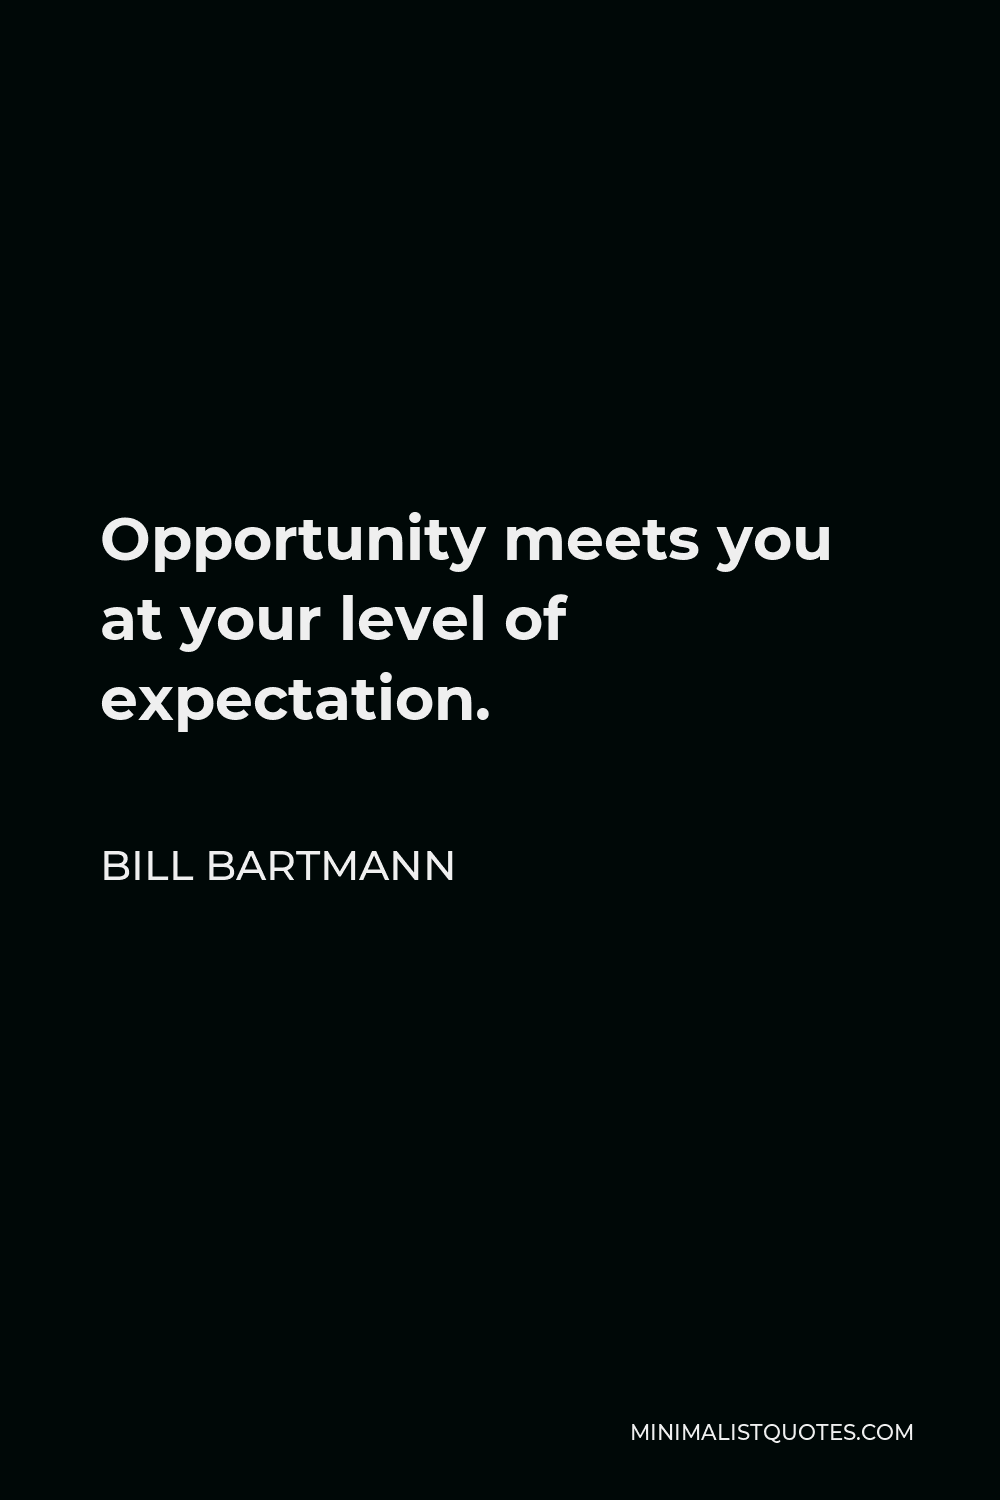 Bill Bartmann Quote - Opportunity meets you at your level of expectation.